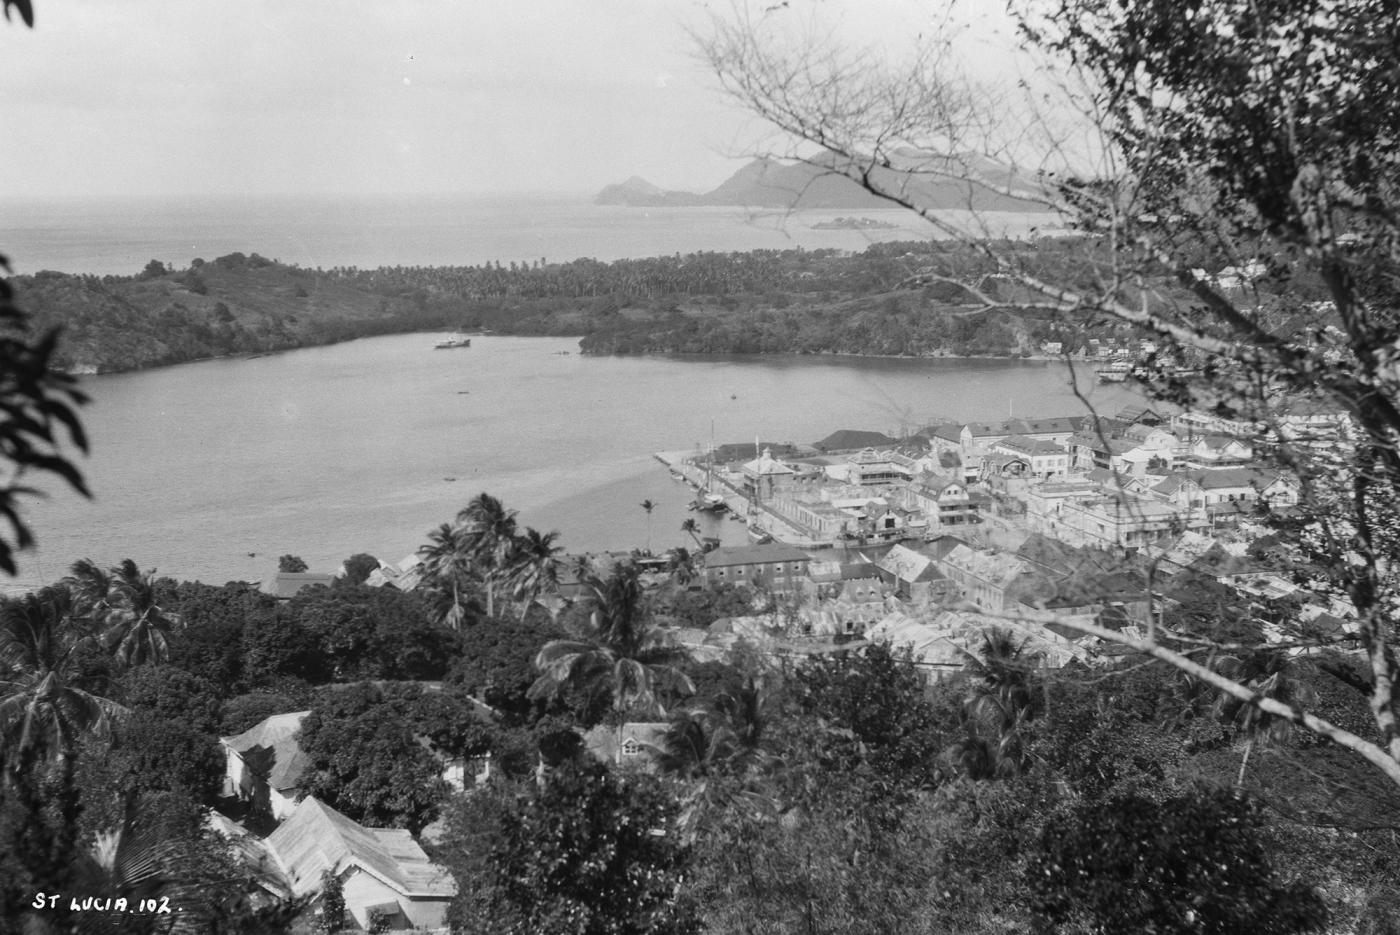 An image showing 'St. Lucia, West Indies'